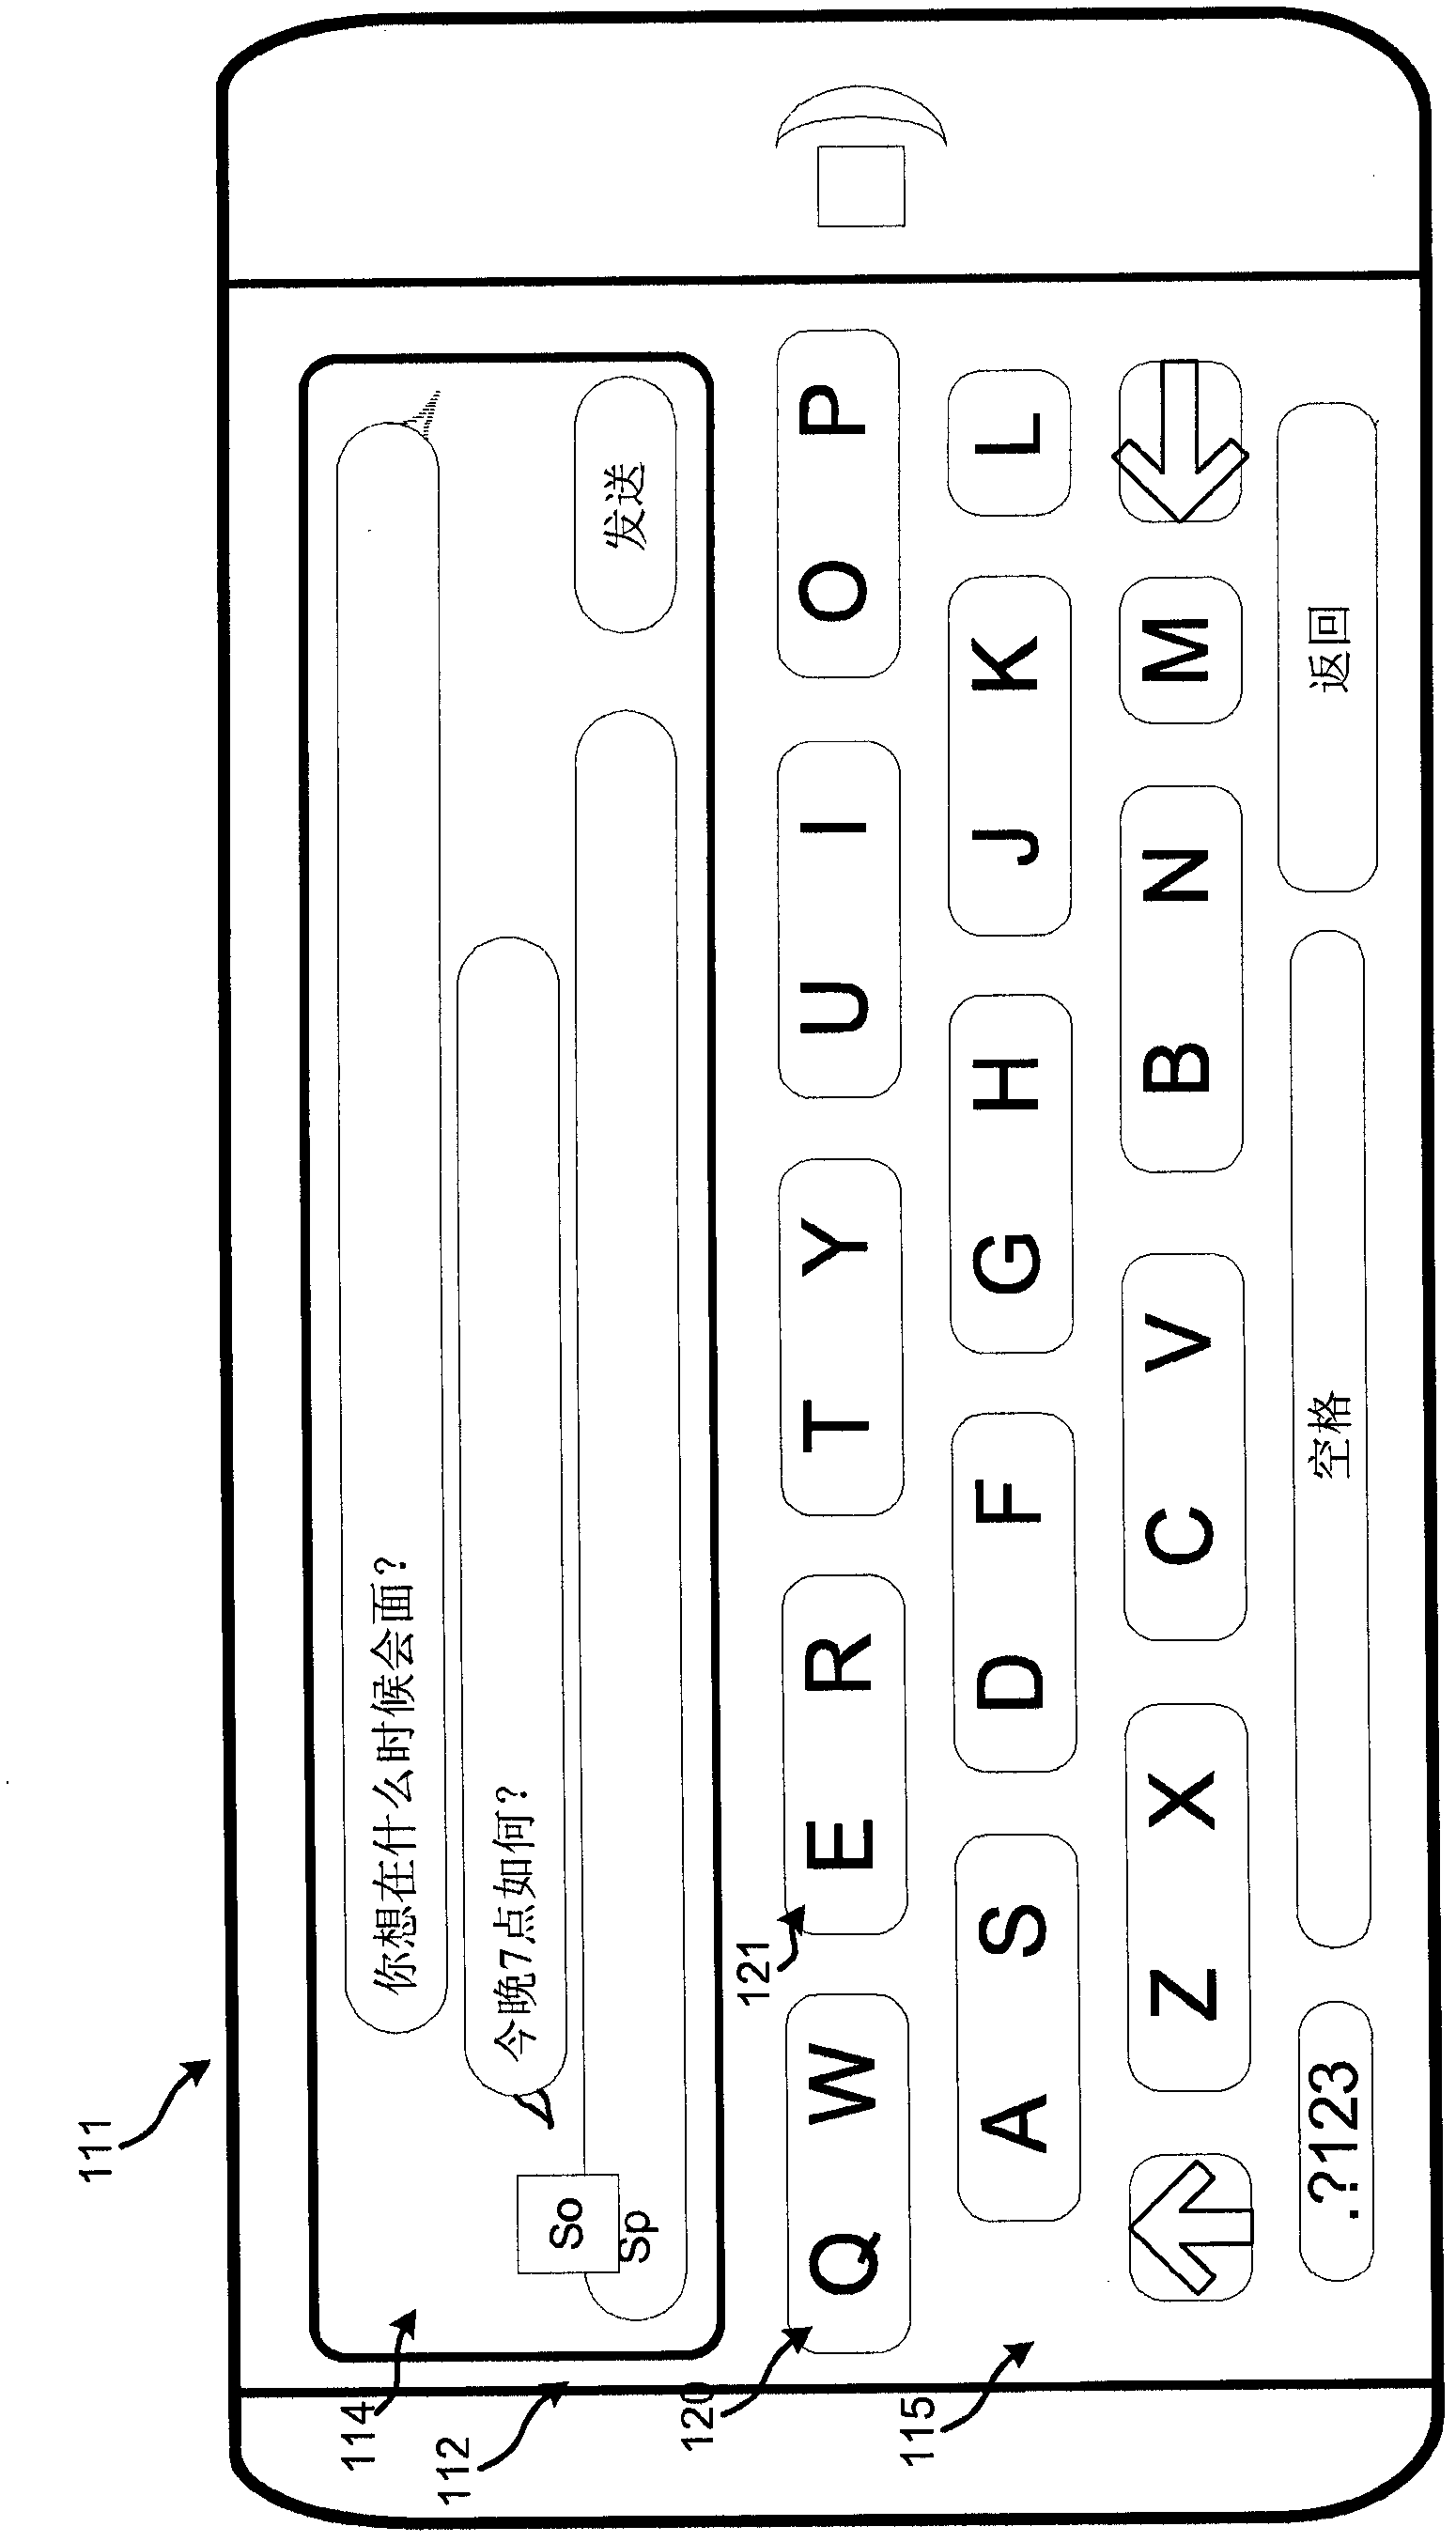 Pressure sensitive user interface for mobile devices